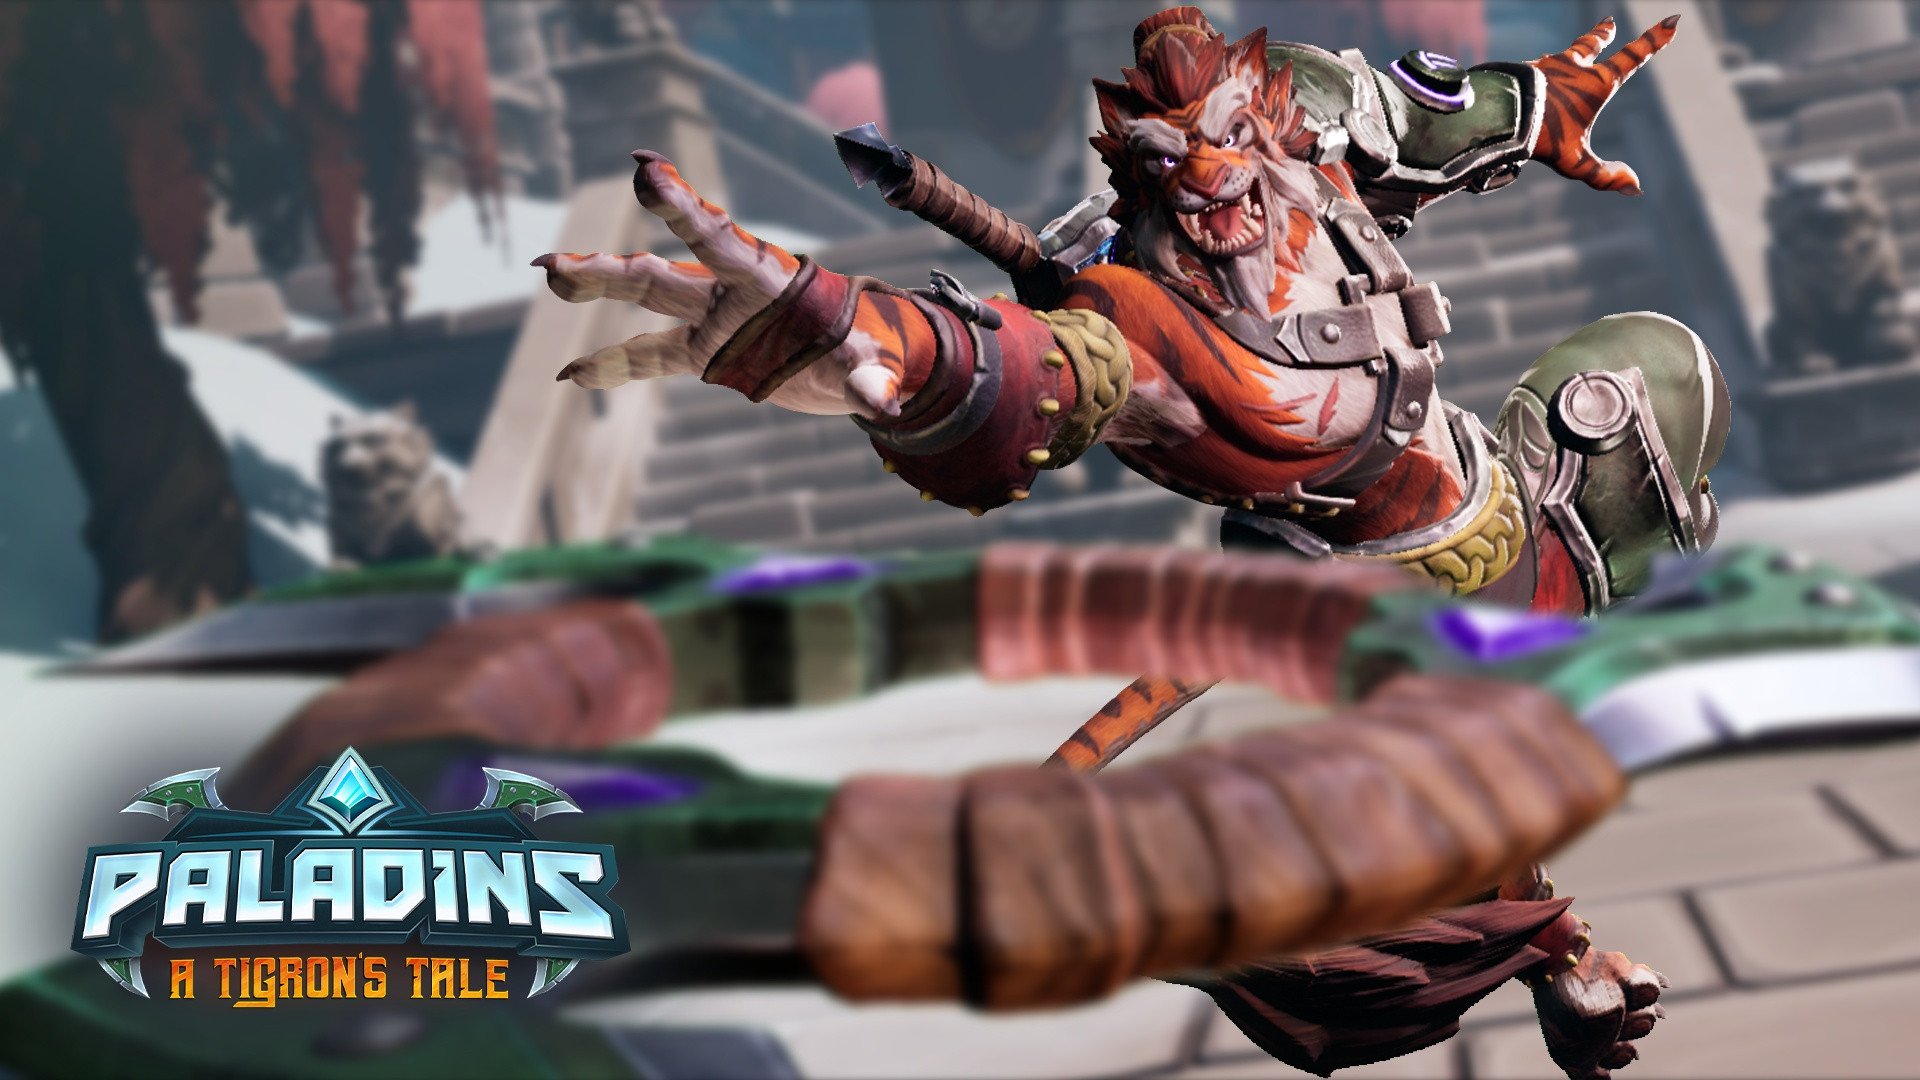 Paladins Season 3 Begins with New Champion Release, Community Battle Pass